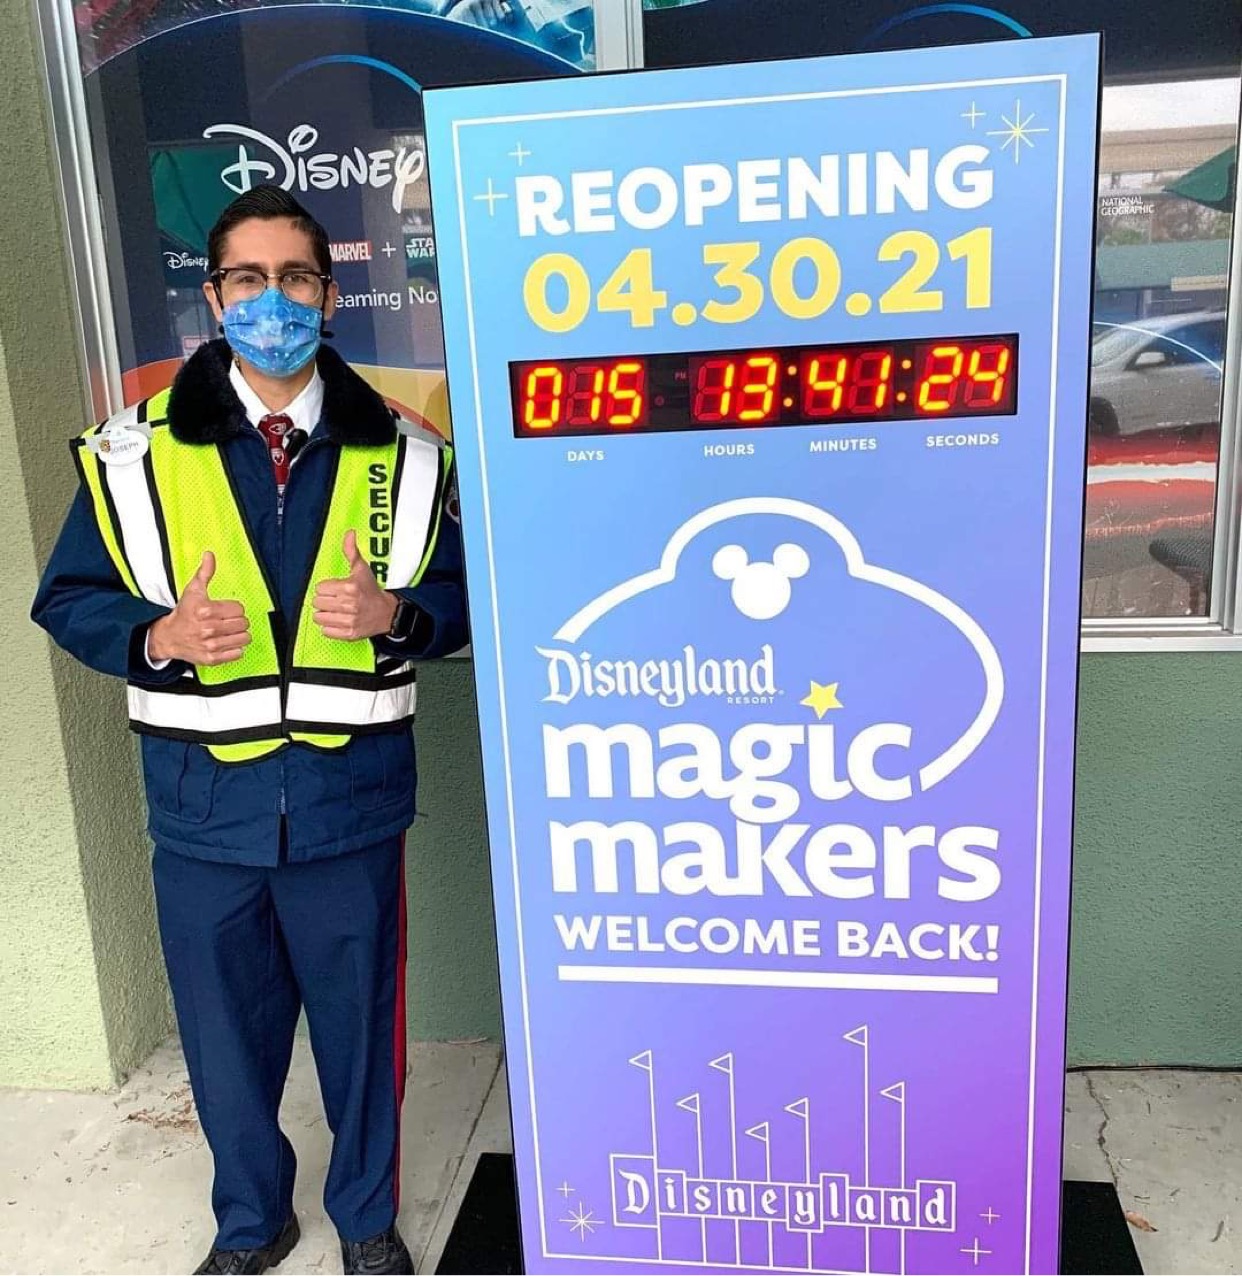 Disneyland Cast Members are counting down the days till reopening